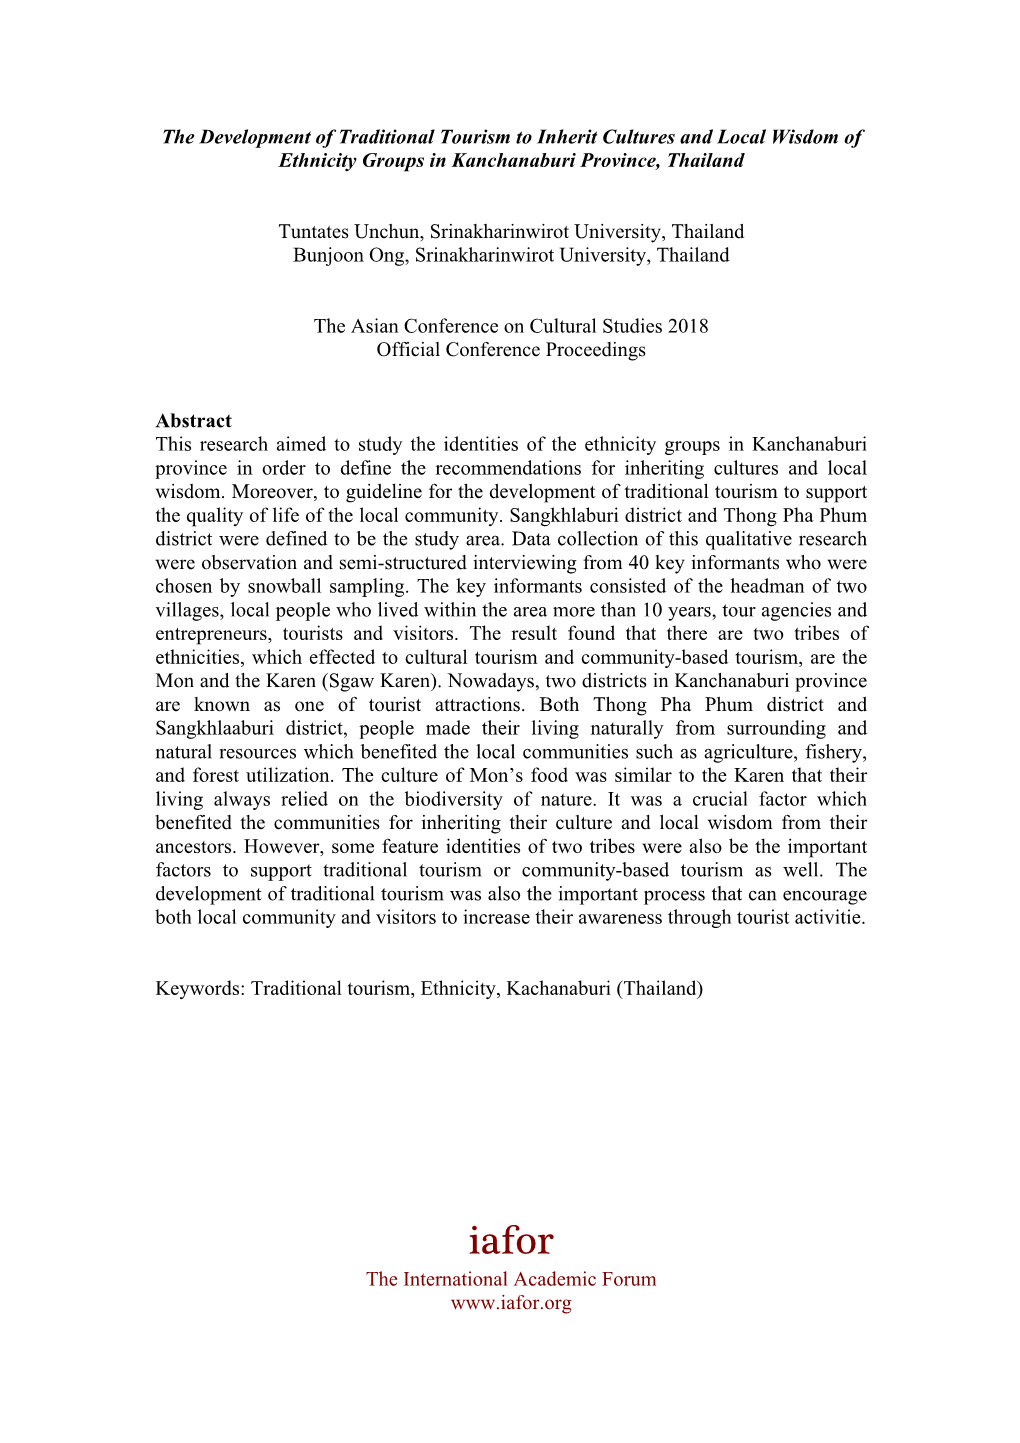 The Development of Traditional Tourism to Inherit Cultures and Local Wisdom of Ethnicity Groups in Kanchanaburi Province, Thailand